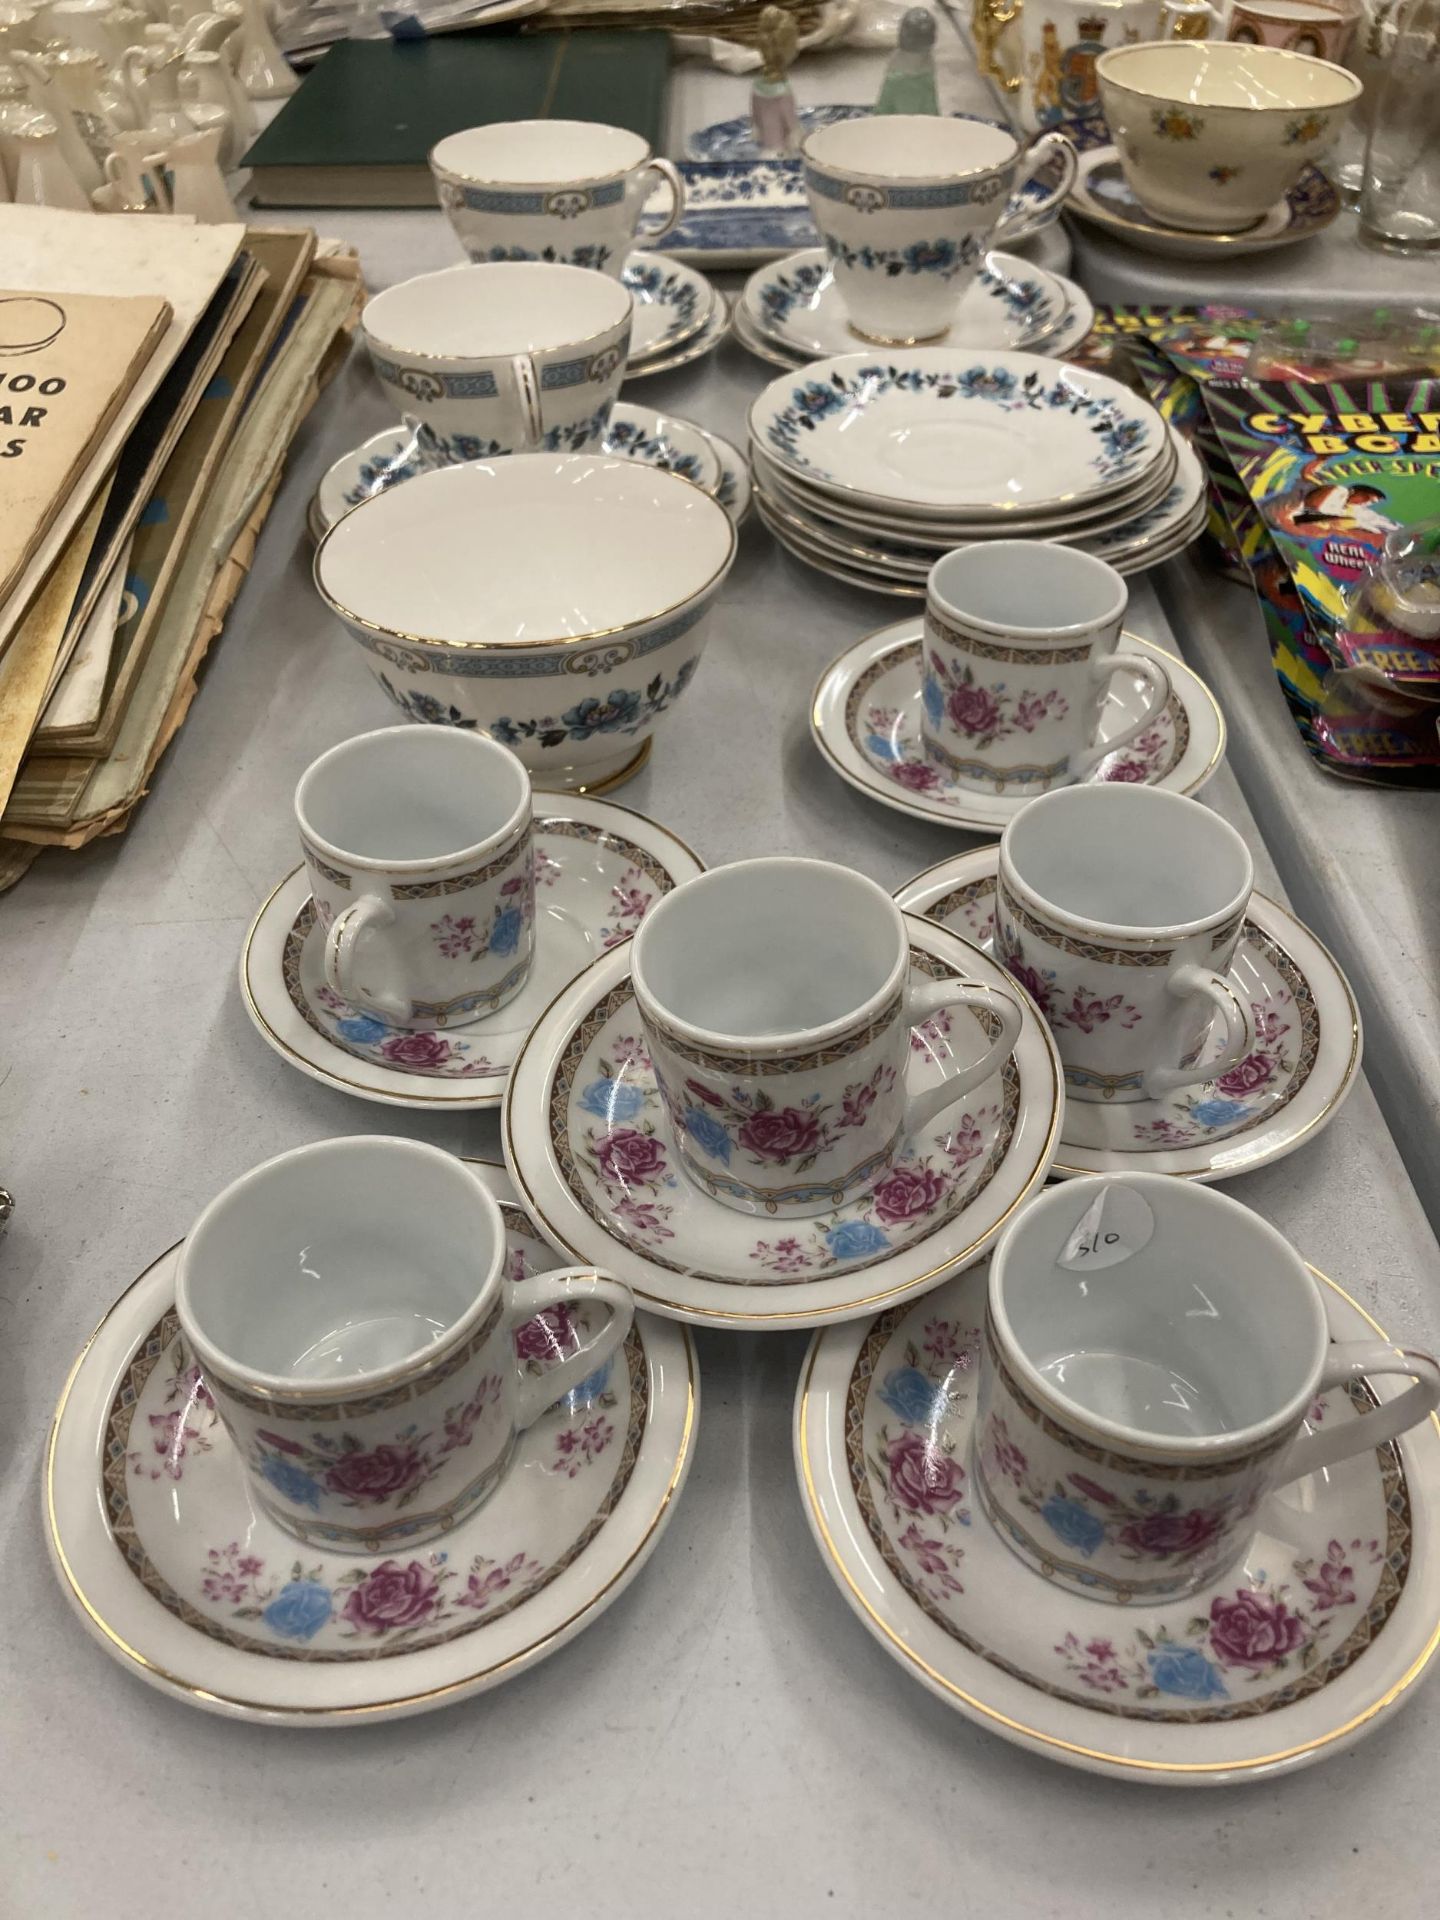 A QUANTITY OF CHINA CUPS AND SAUCERS PLUS A SUGAR BOWL